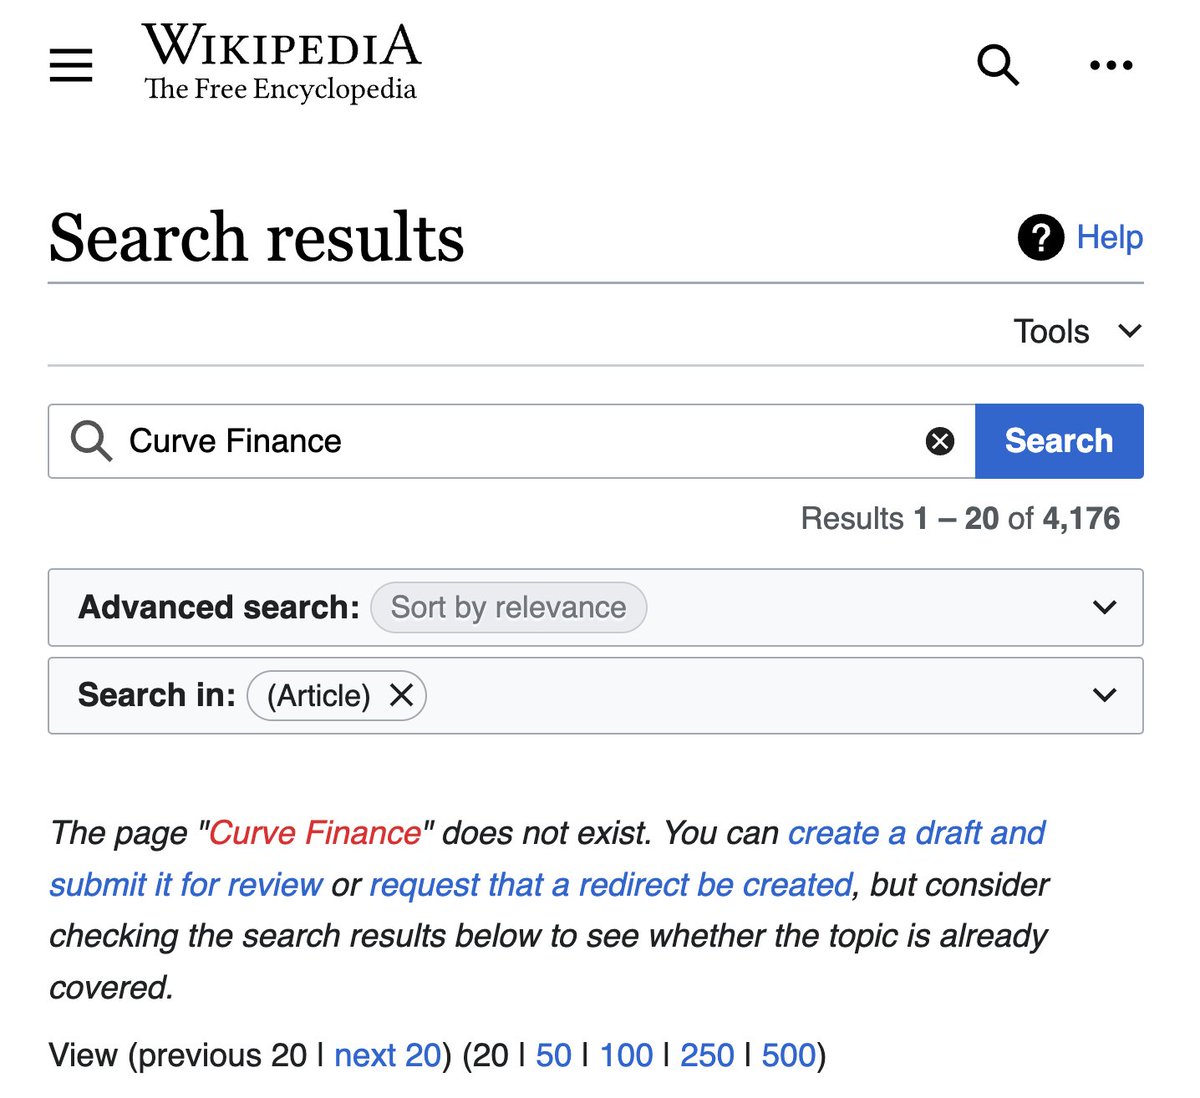 I am admittedly in deep, but this is crazy to me. Years of history and tech just totally absent. Other things that don't exist on Wikipedia: Compound, Yearn Finance, Lido, Cosmos, Optimism, Arbitrum, ENS, and many more.